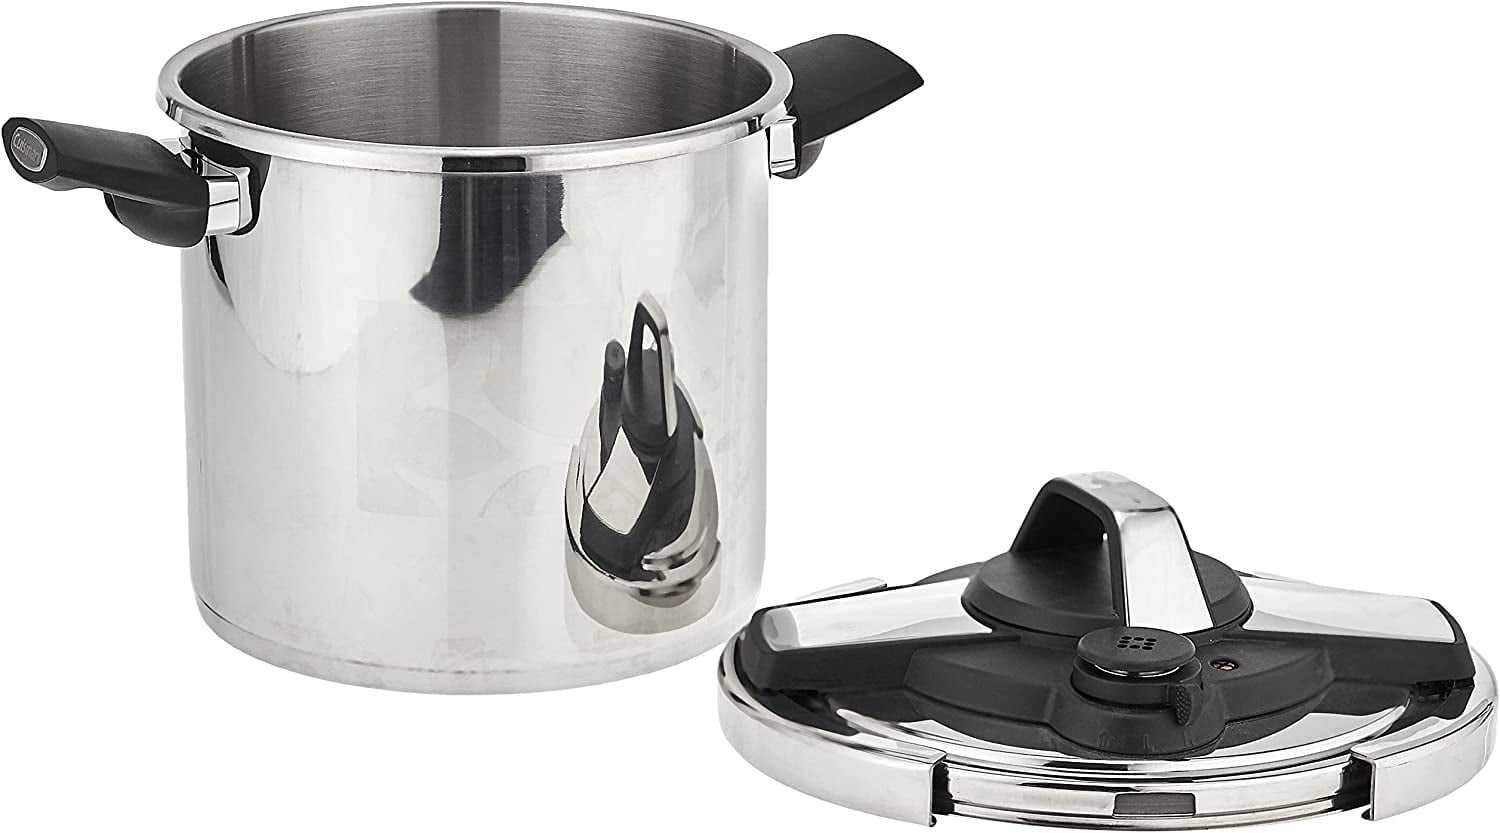 Pressure Cookers Parts & Accessories - Free Shipping over $35 - Cuisinart